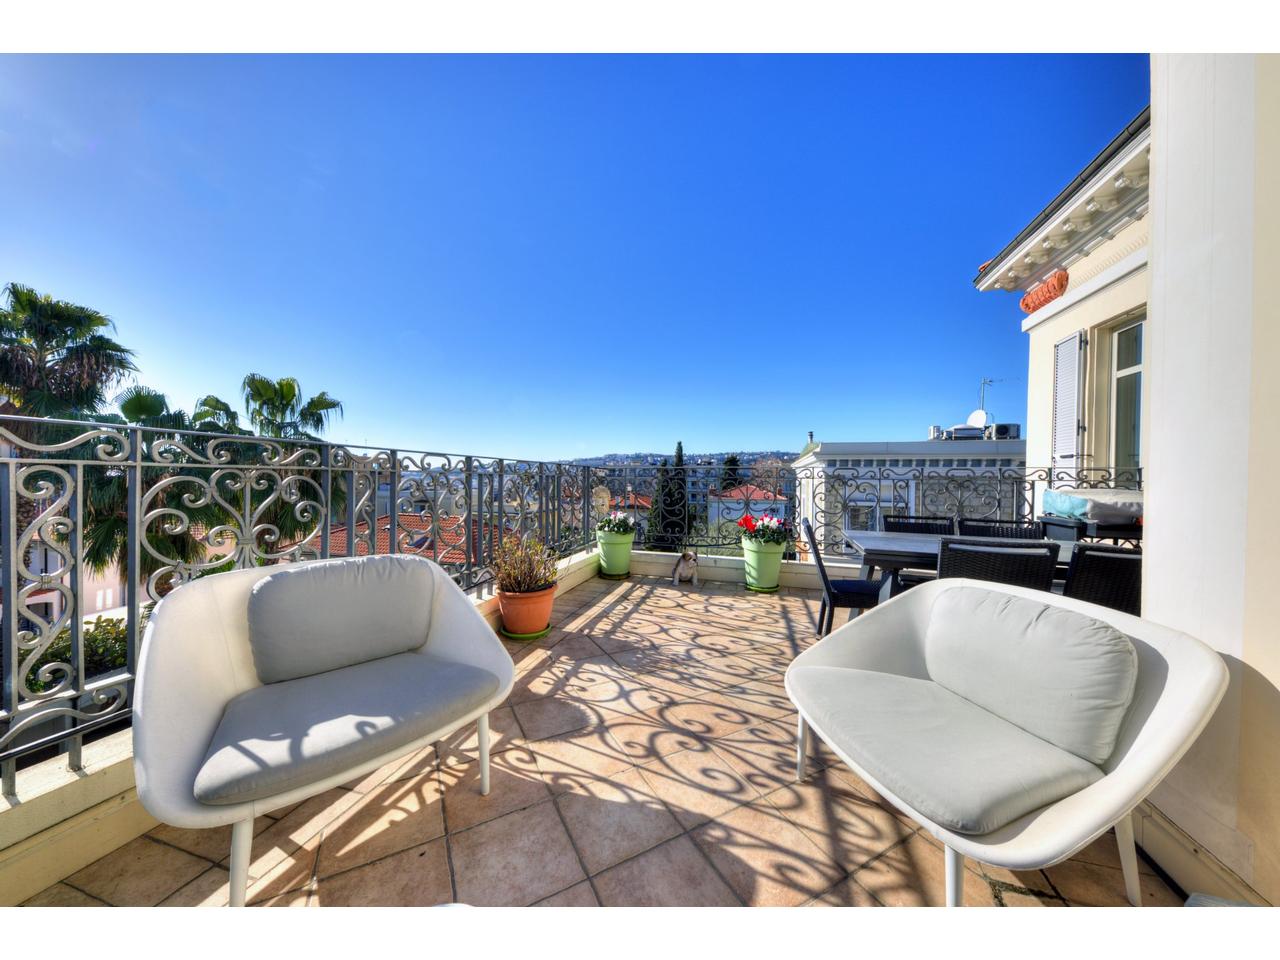 Nice Riviera - Real estate agency Nice Côte d'Azur | Appartement  4 Rooms 121.77m2  for sale  1 495 000 €